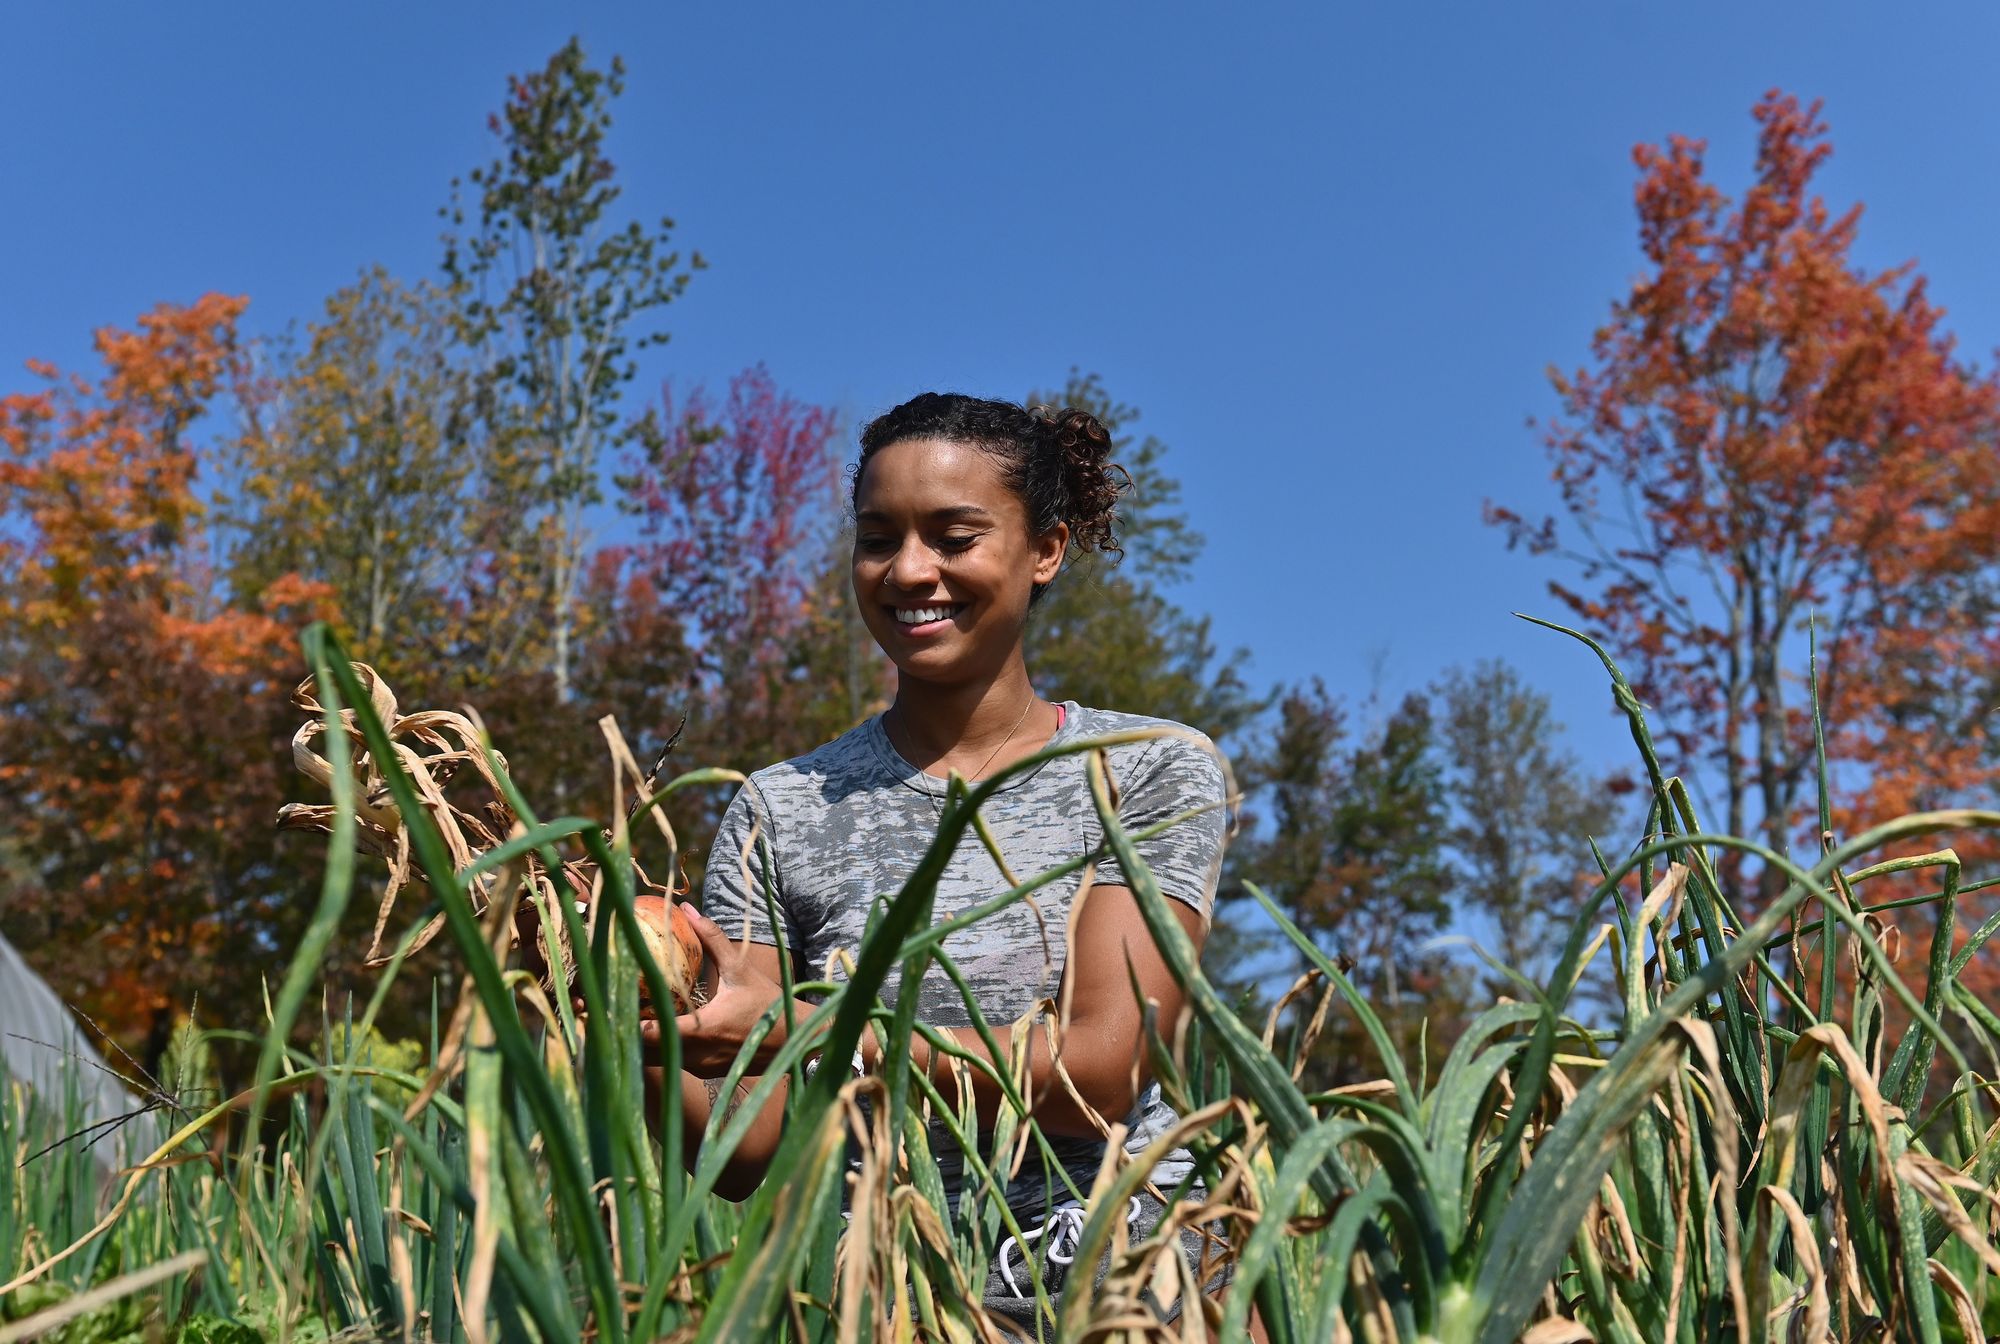 Brooke Bridges, assistant kitchen manager at Soul Fire Farm and public speaker harvests onions on September 25, 2020 in Petersburg, New York.